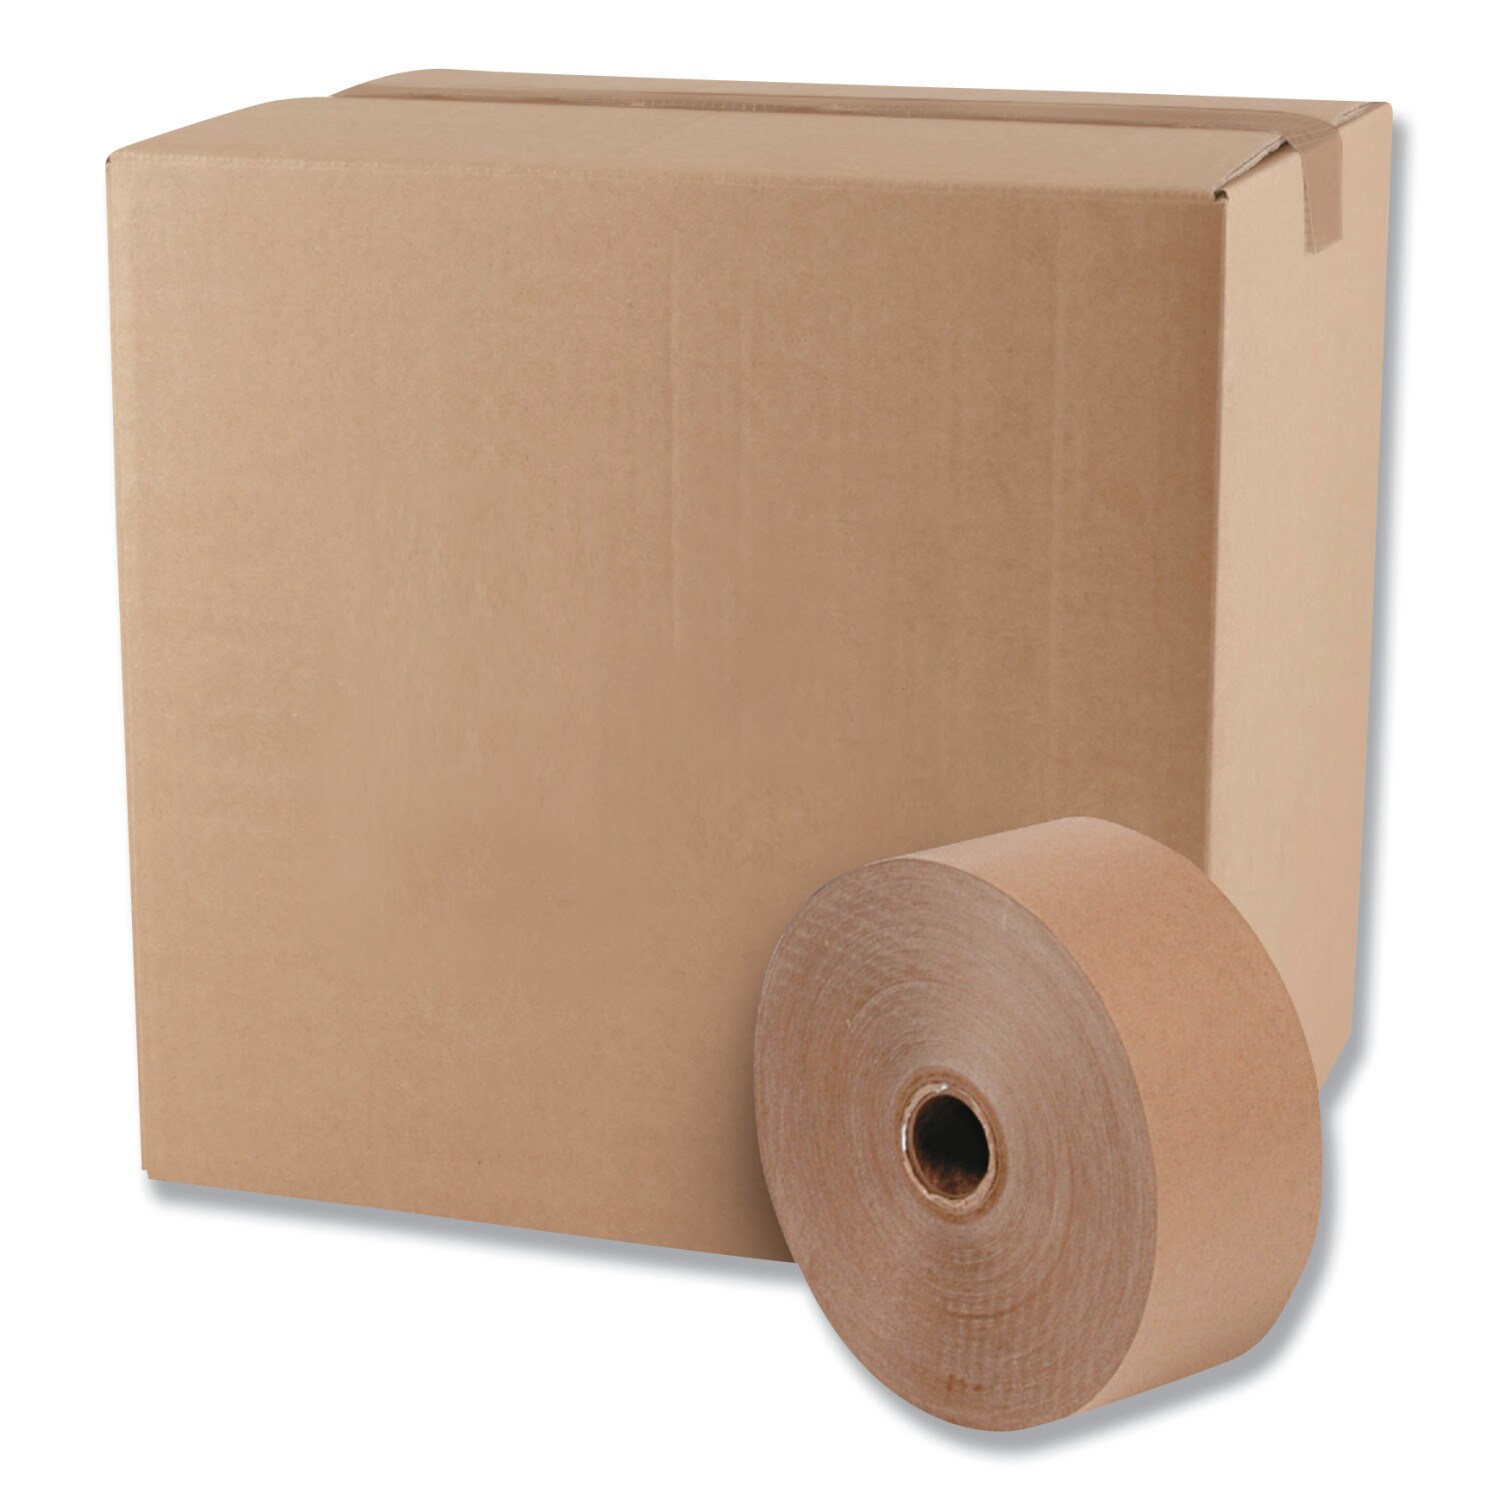 4 x BROWN & TRANSPARENT PACKING PARCEL CARTON PACKAGING TAPE 48MM X 60M 